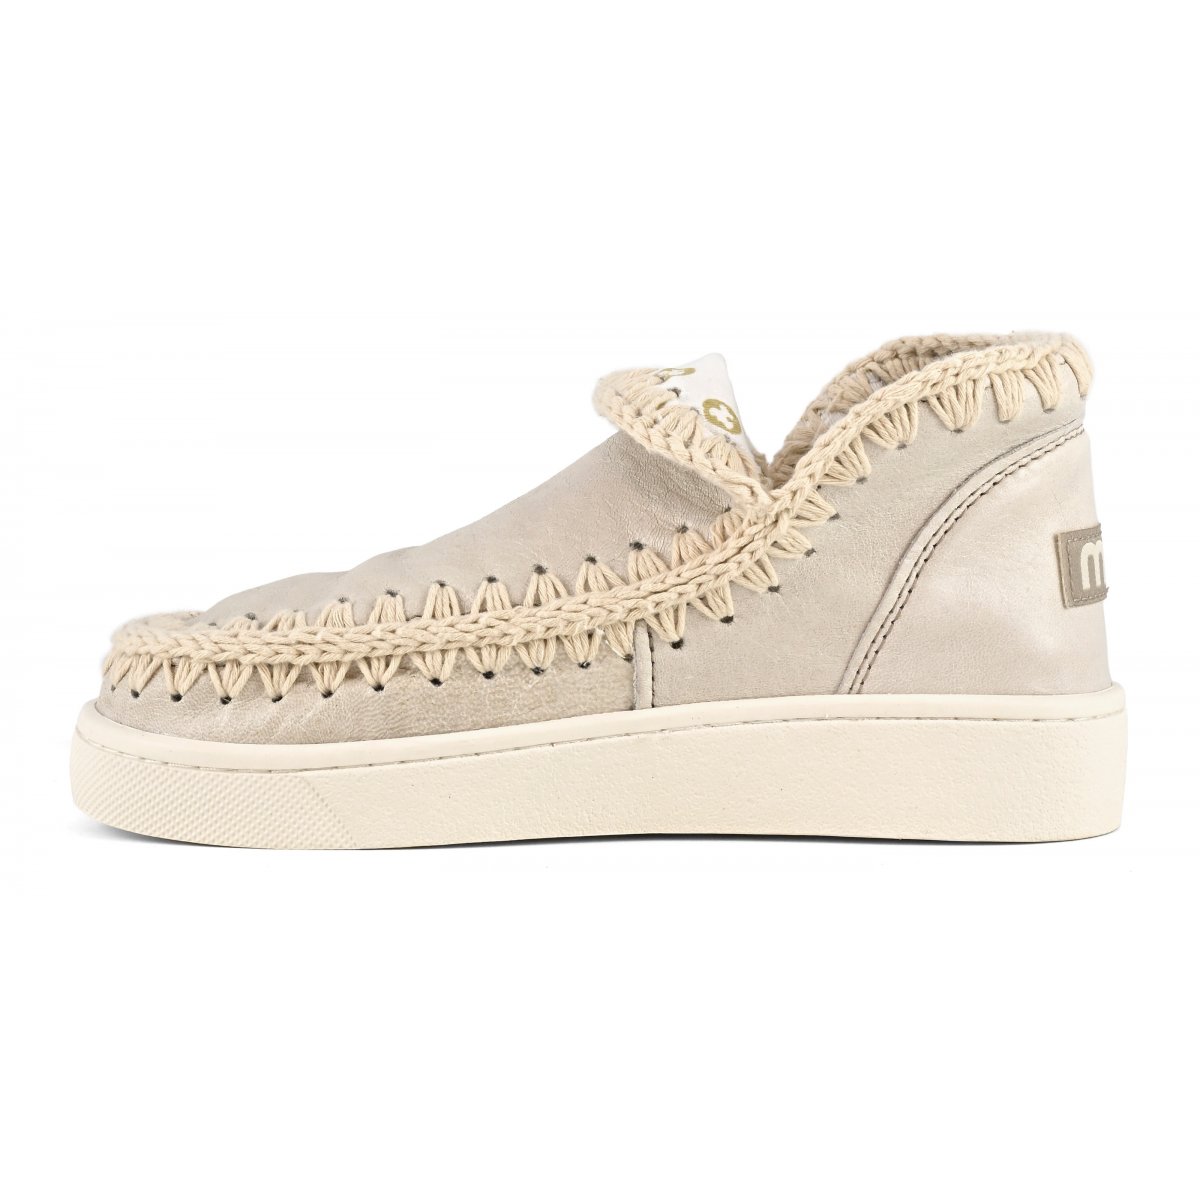 Summer Eskimo sneaker special leathers CSWHI img 5